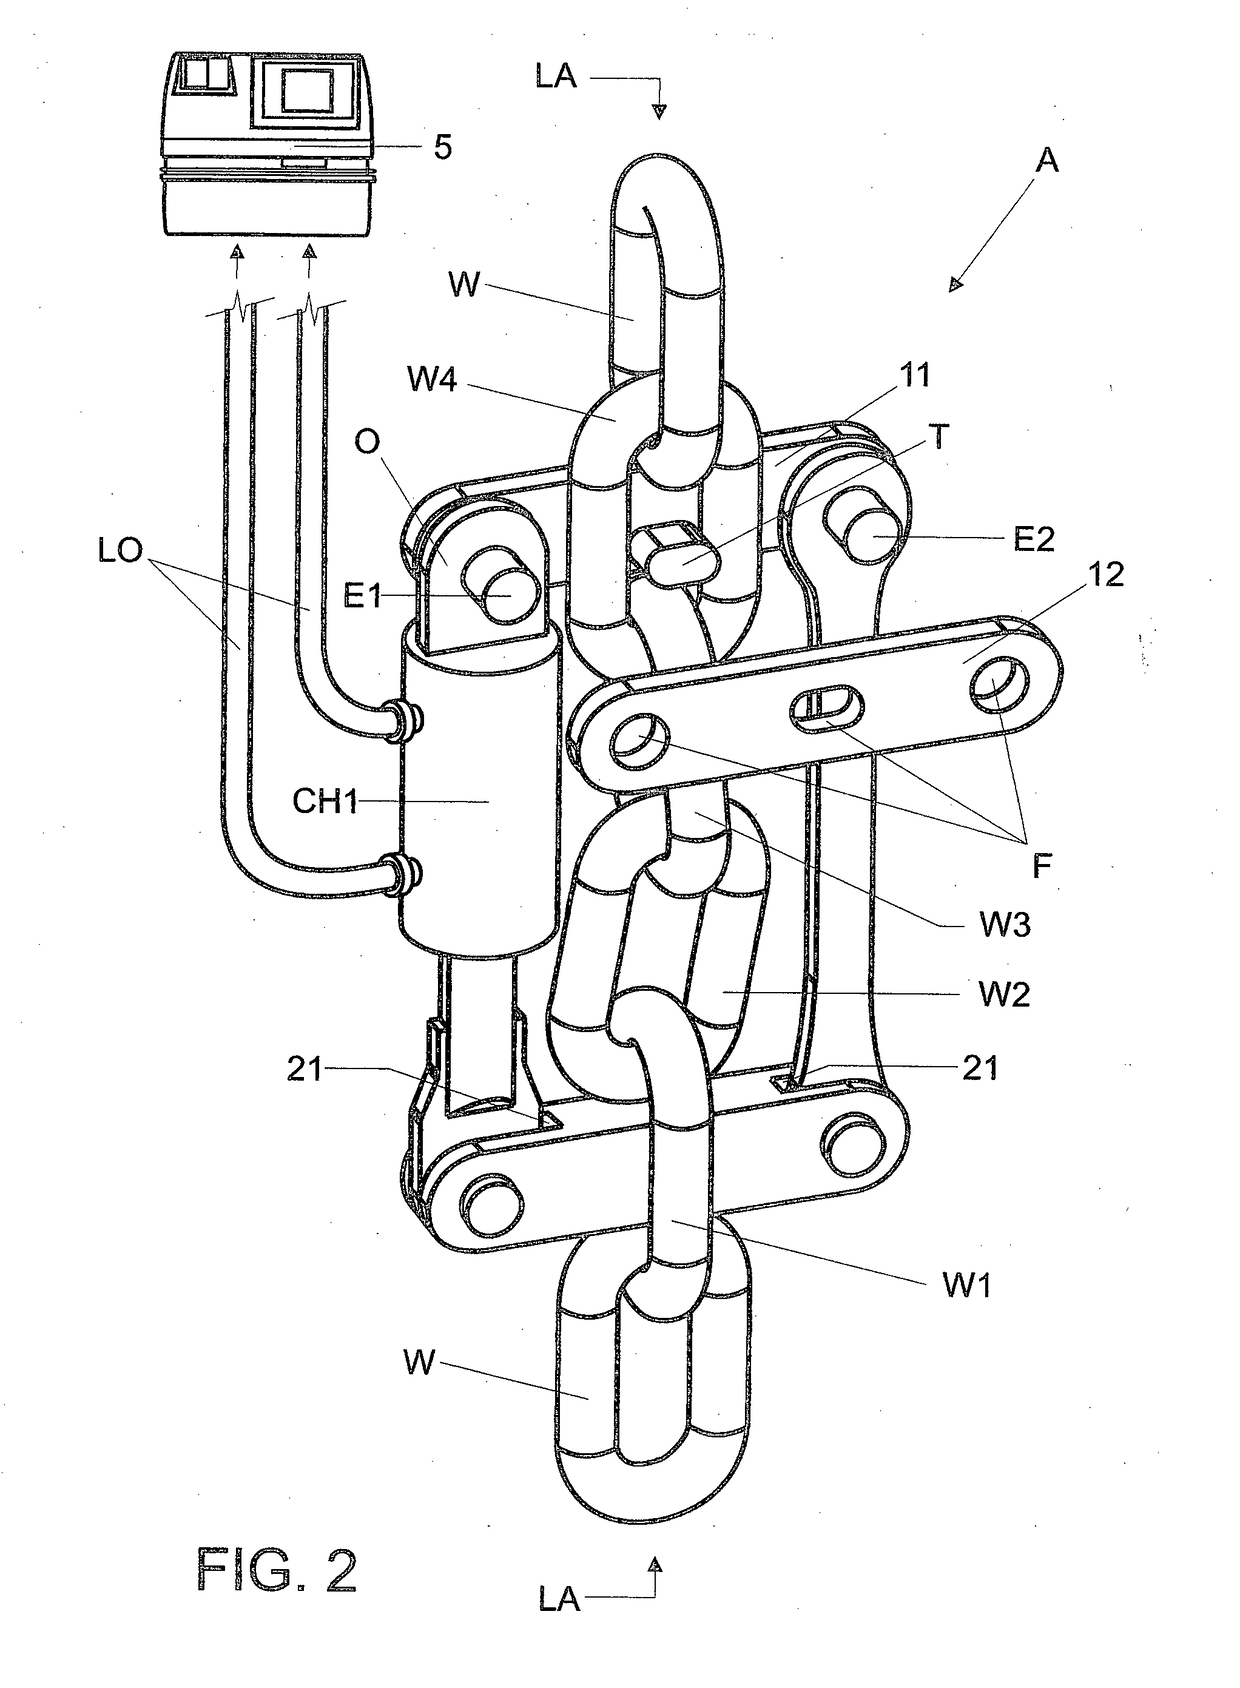 Device for determining traction on anchoring lines